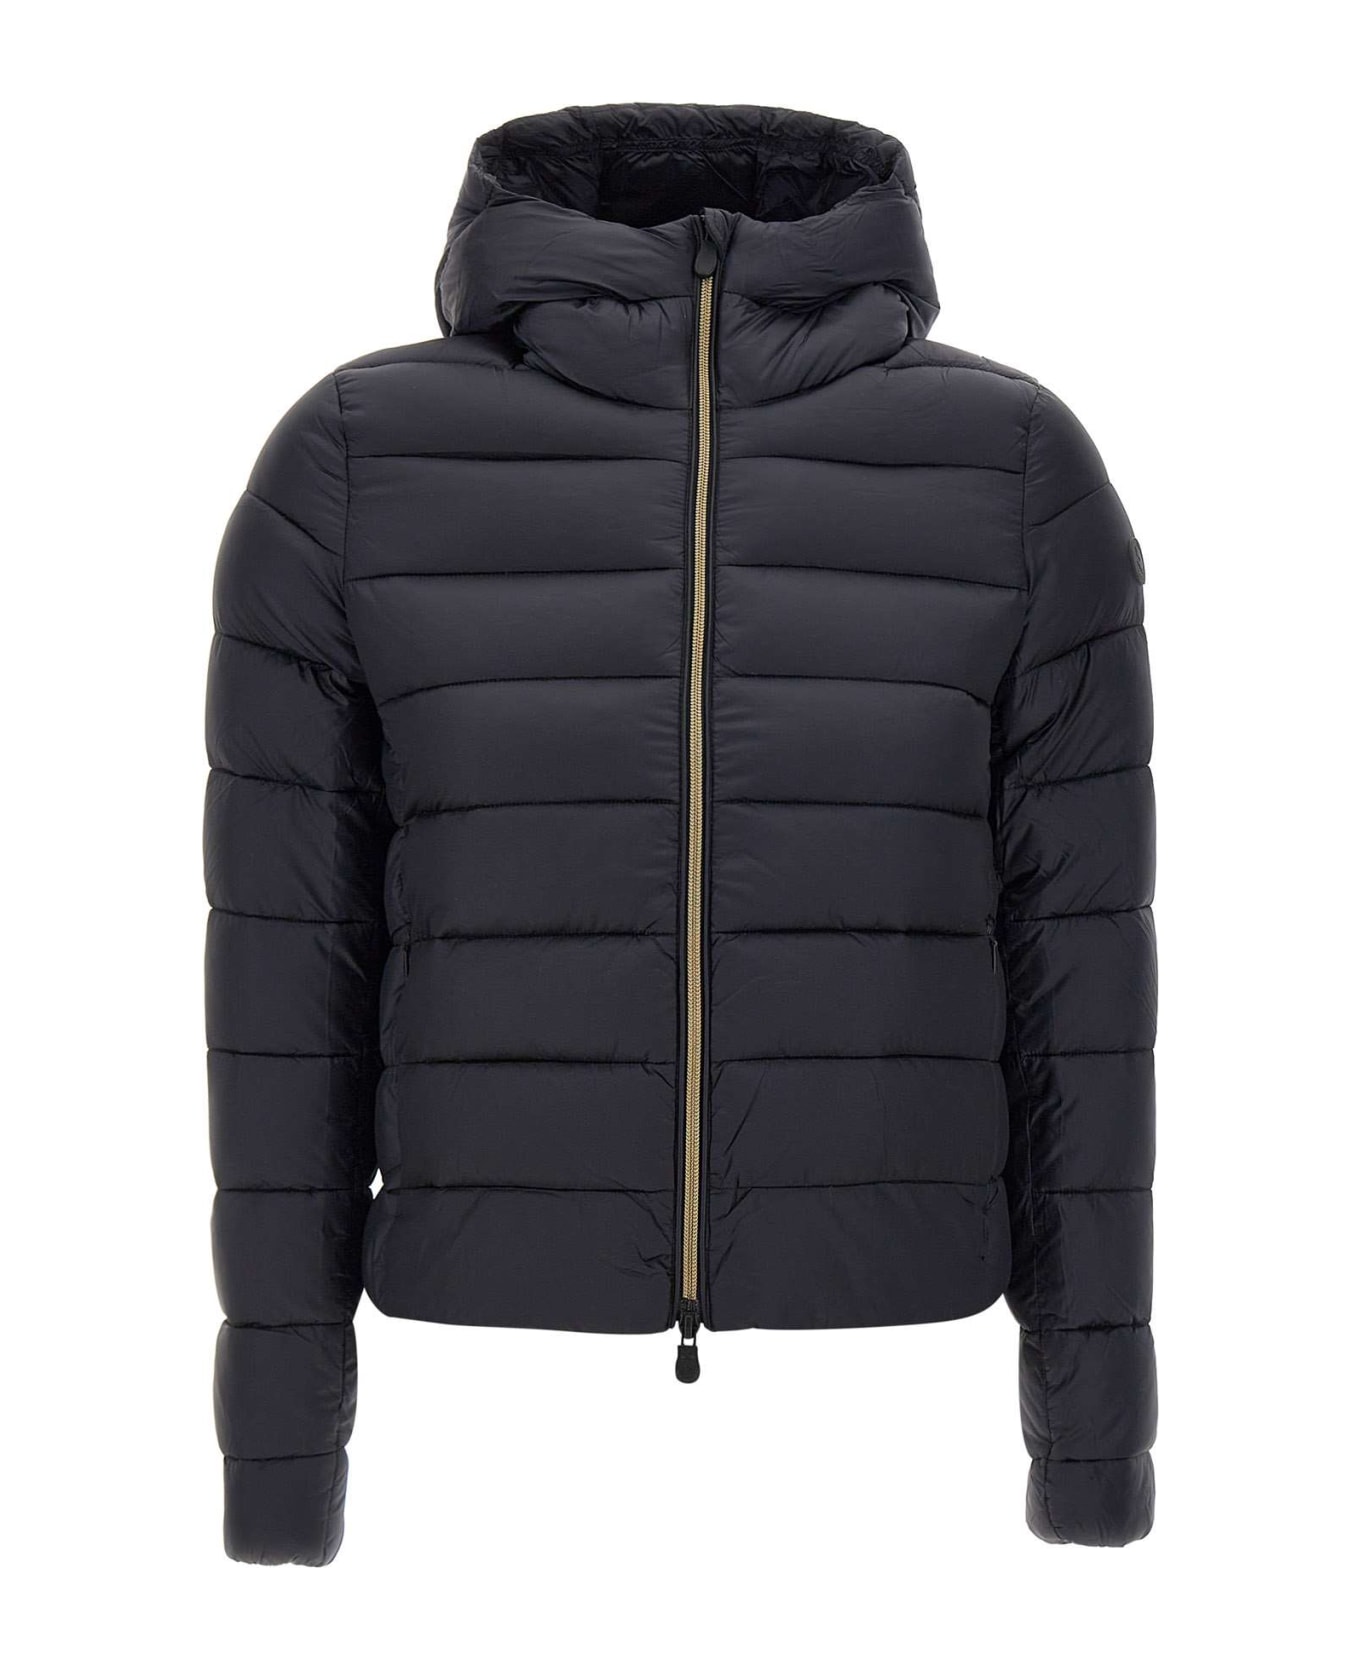 Save the Duck 'iris17 Candy' Down Jacket - Black